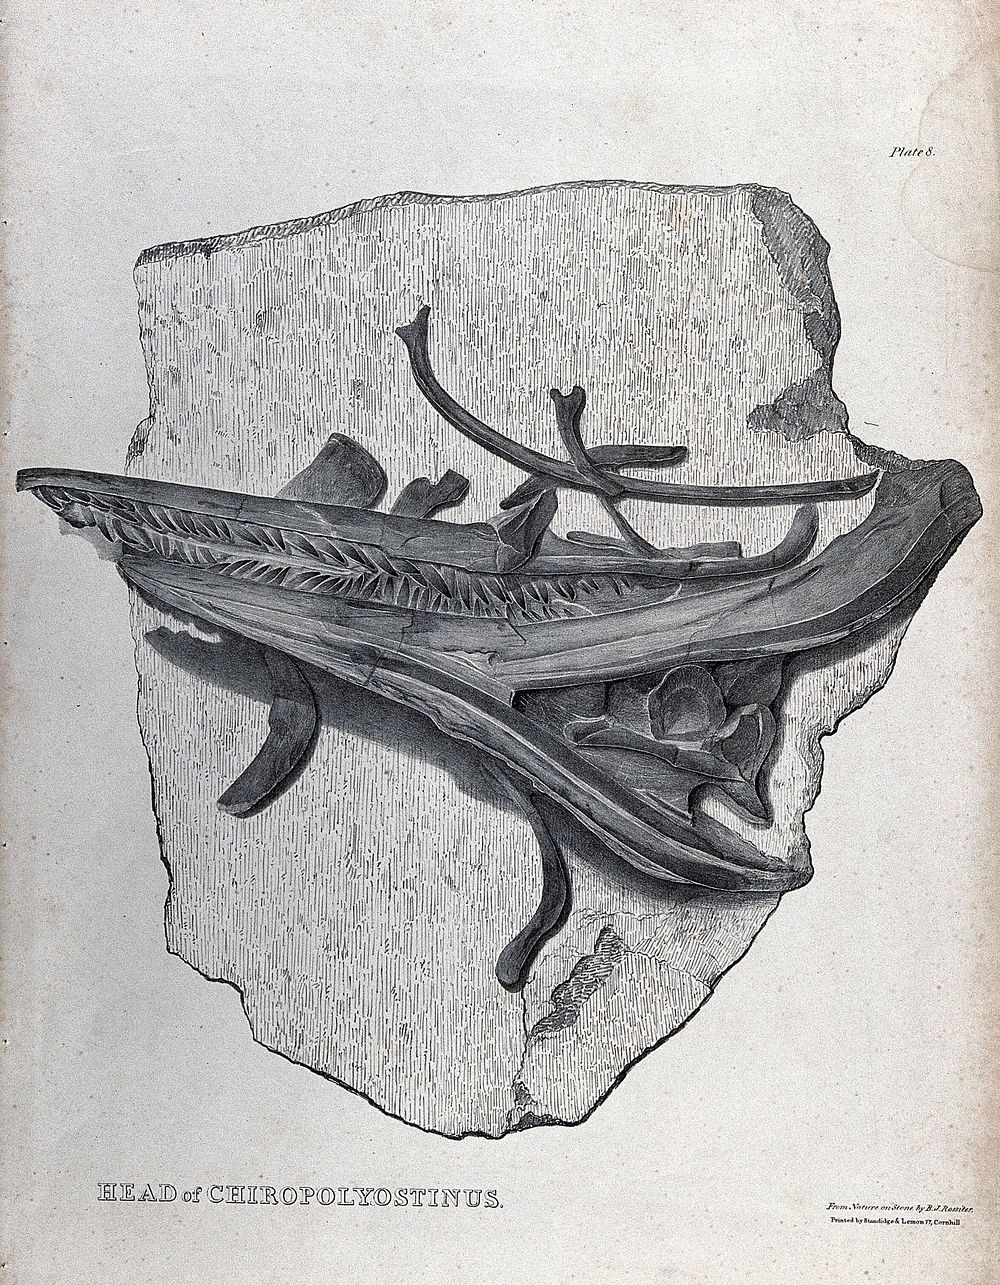 Fossilized head of a chiropolyostinus. Lithograph by B.J. Rossiter, 18--.